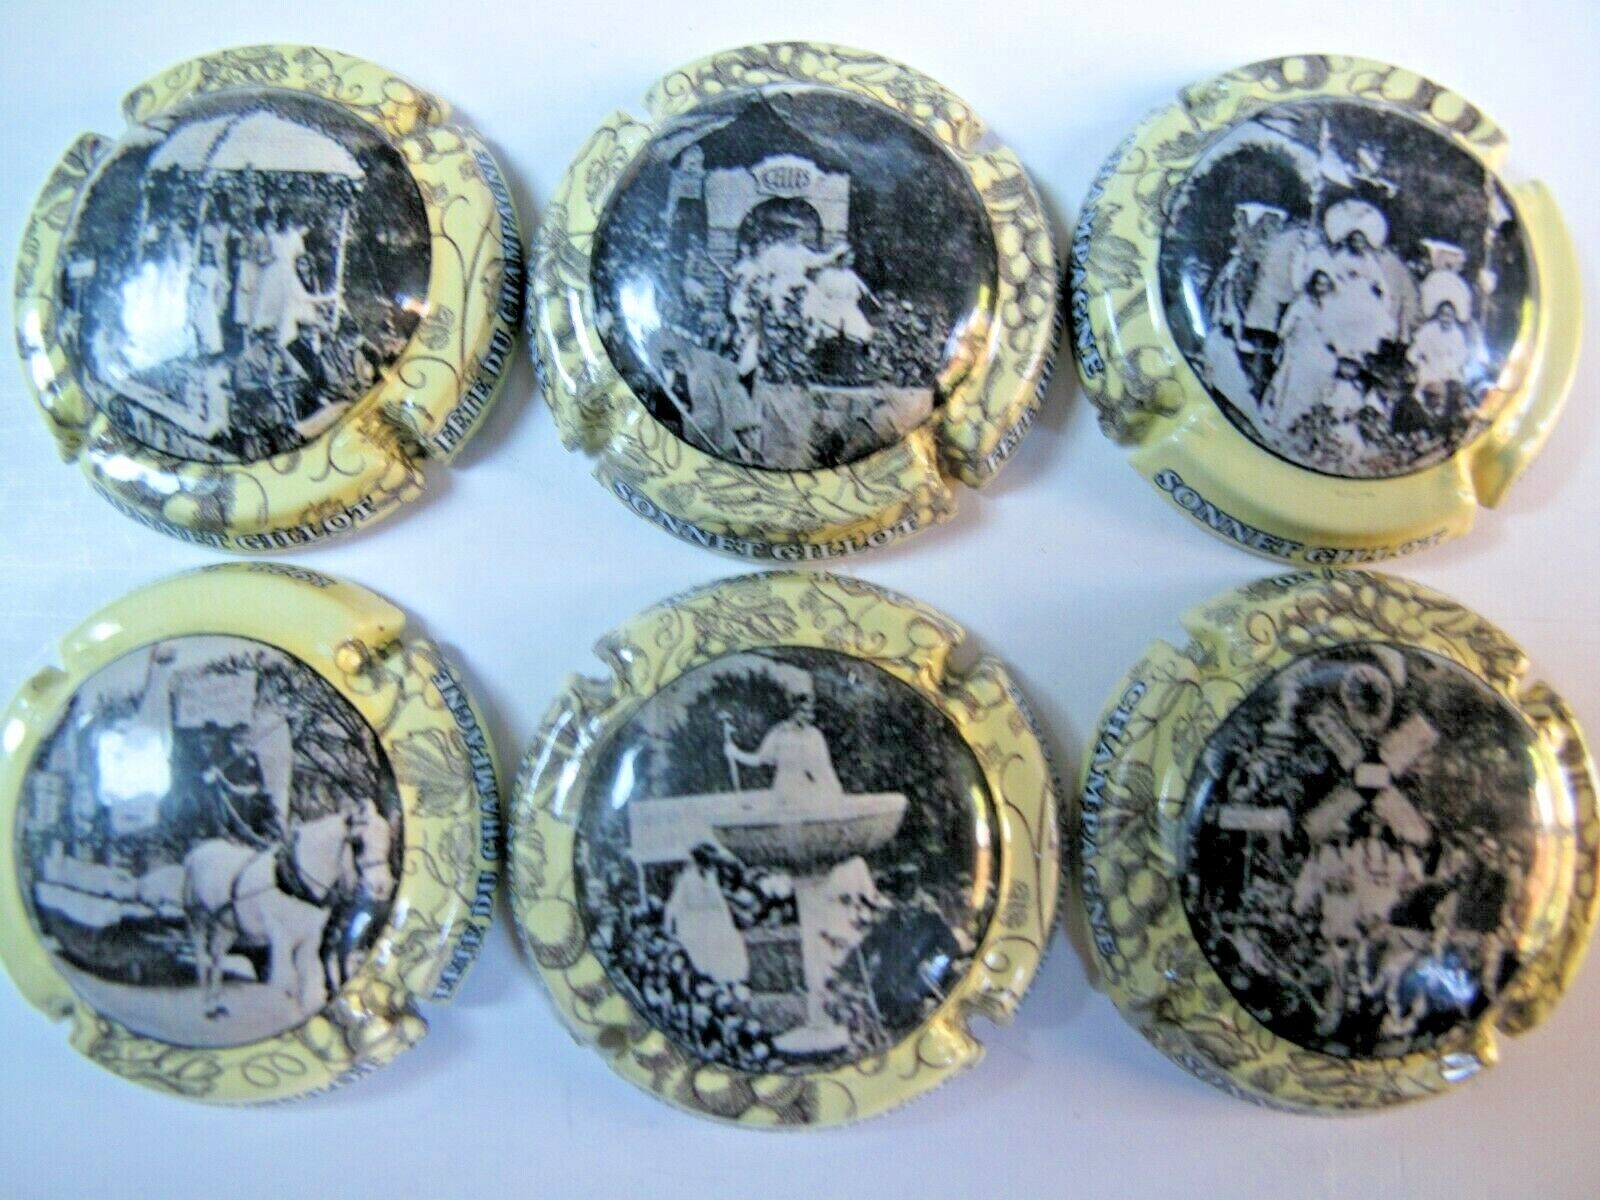 Series of 6 Champagne Capsules SONNET - GILLOT, 13 to 18 Champagne Festival 1921